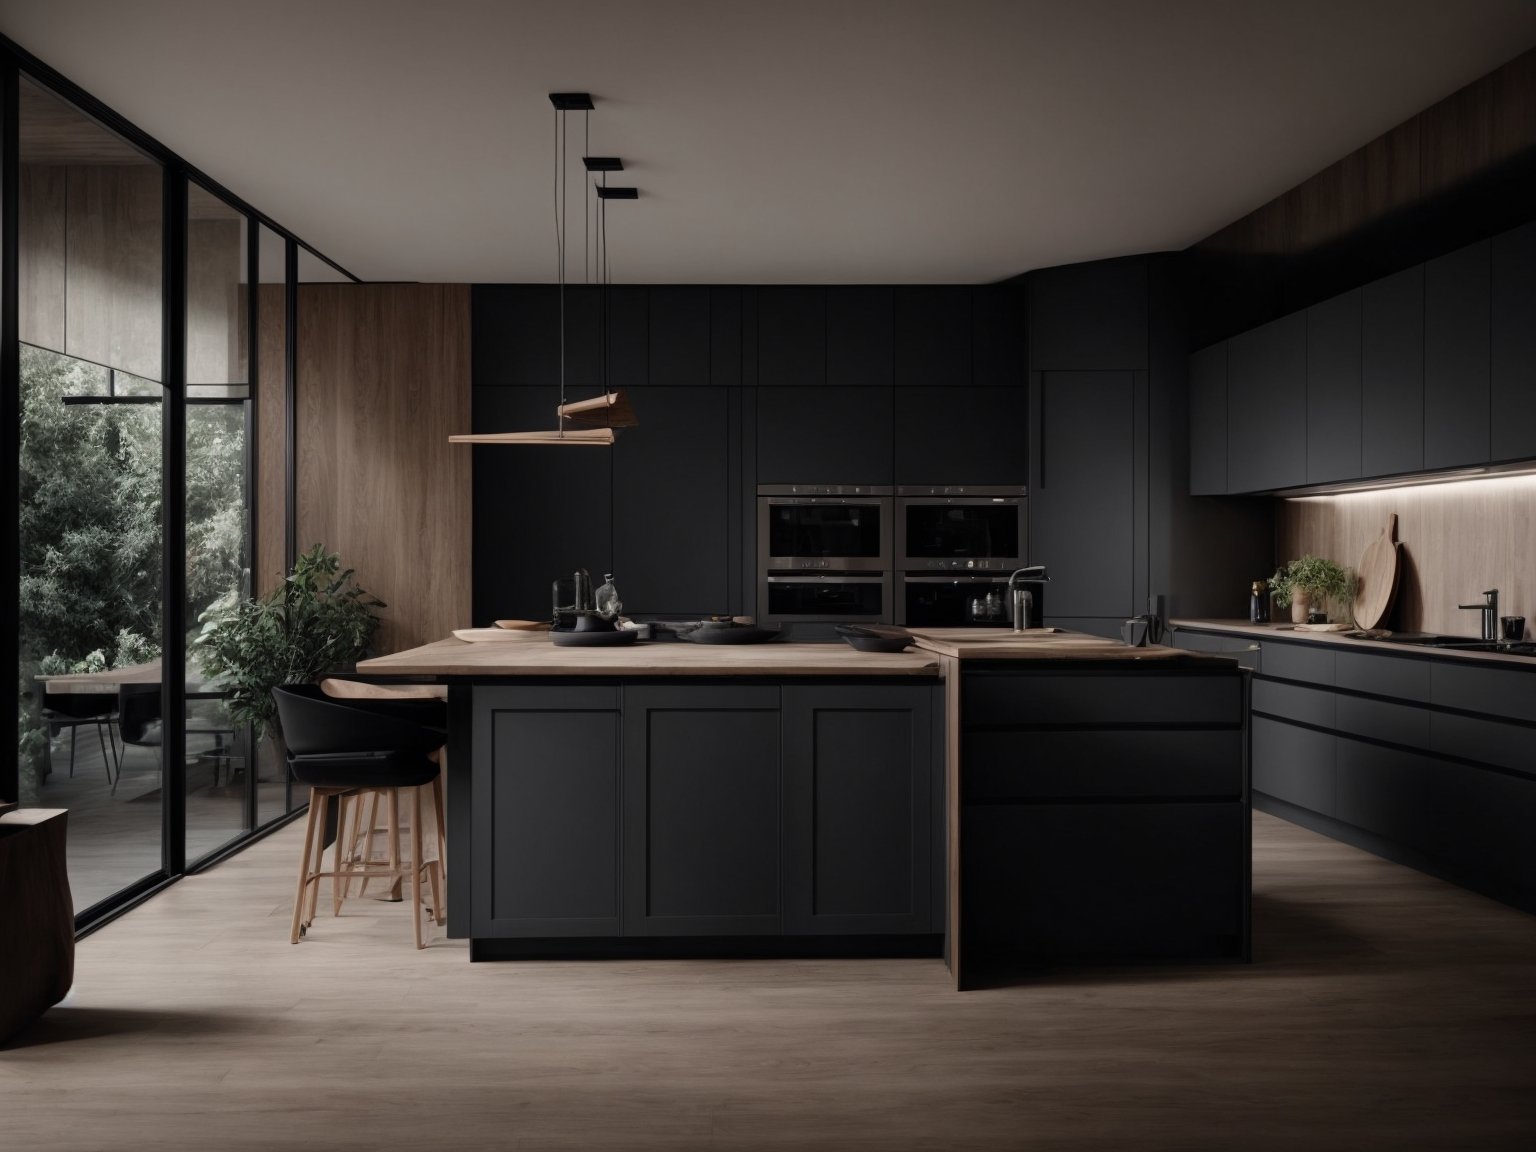 A contemporary kitchen featuring charcoal grey cabinets and marble countertops